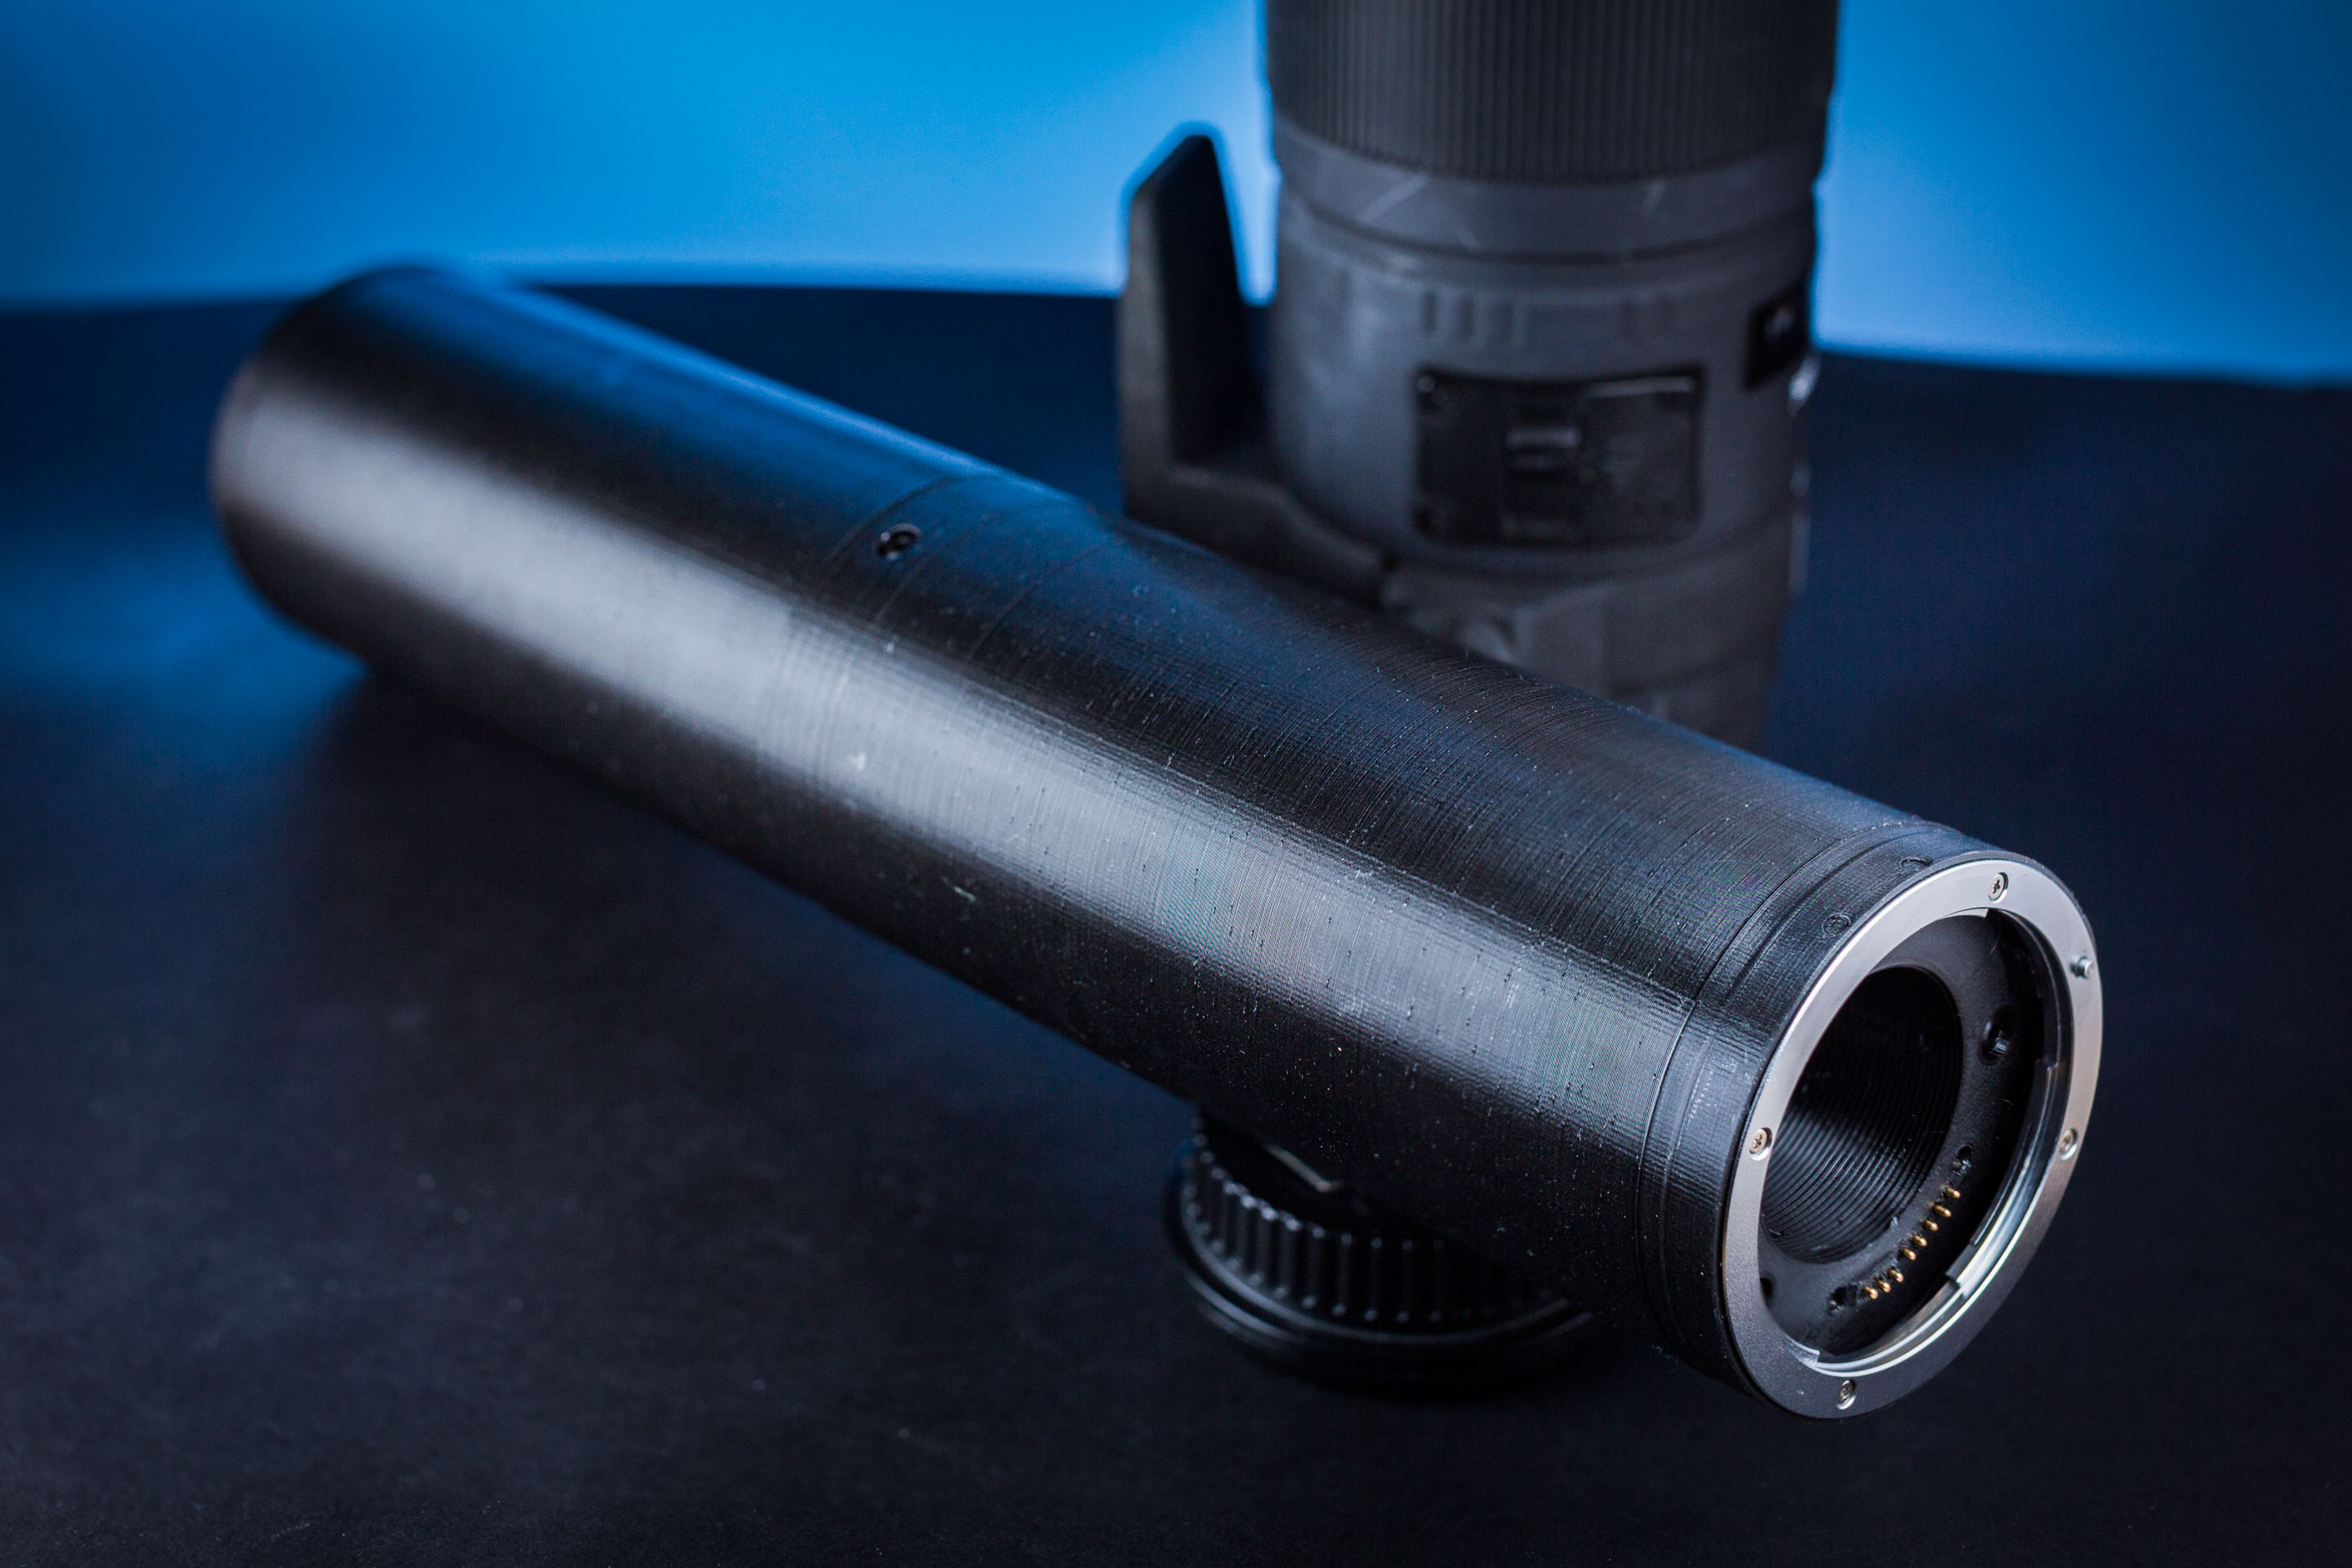 300mm extension tube